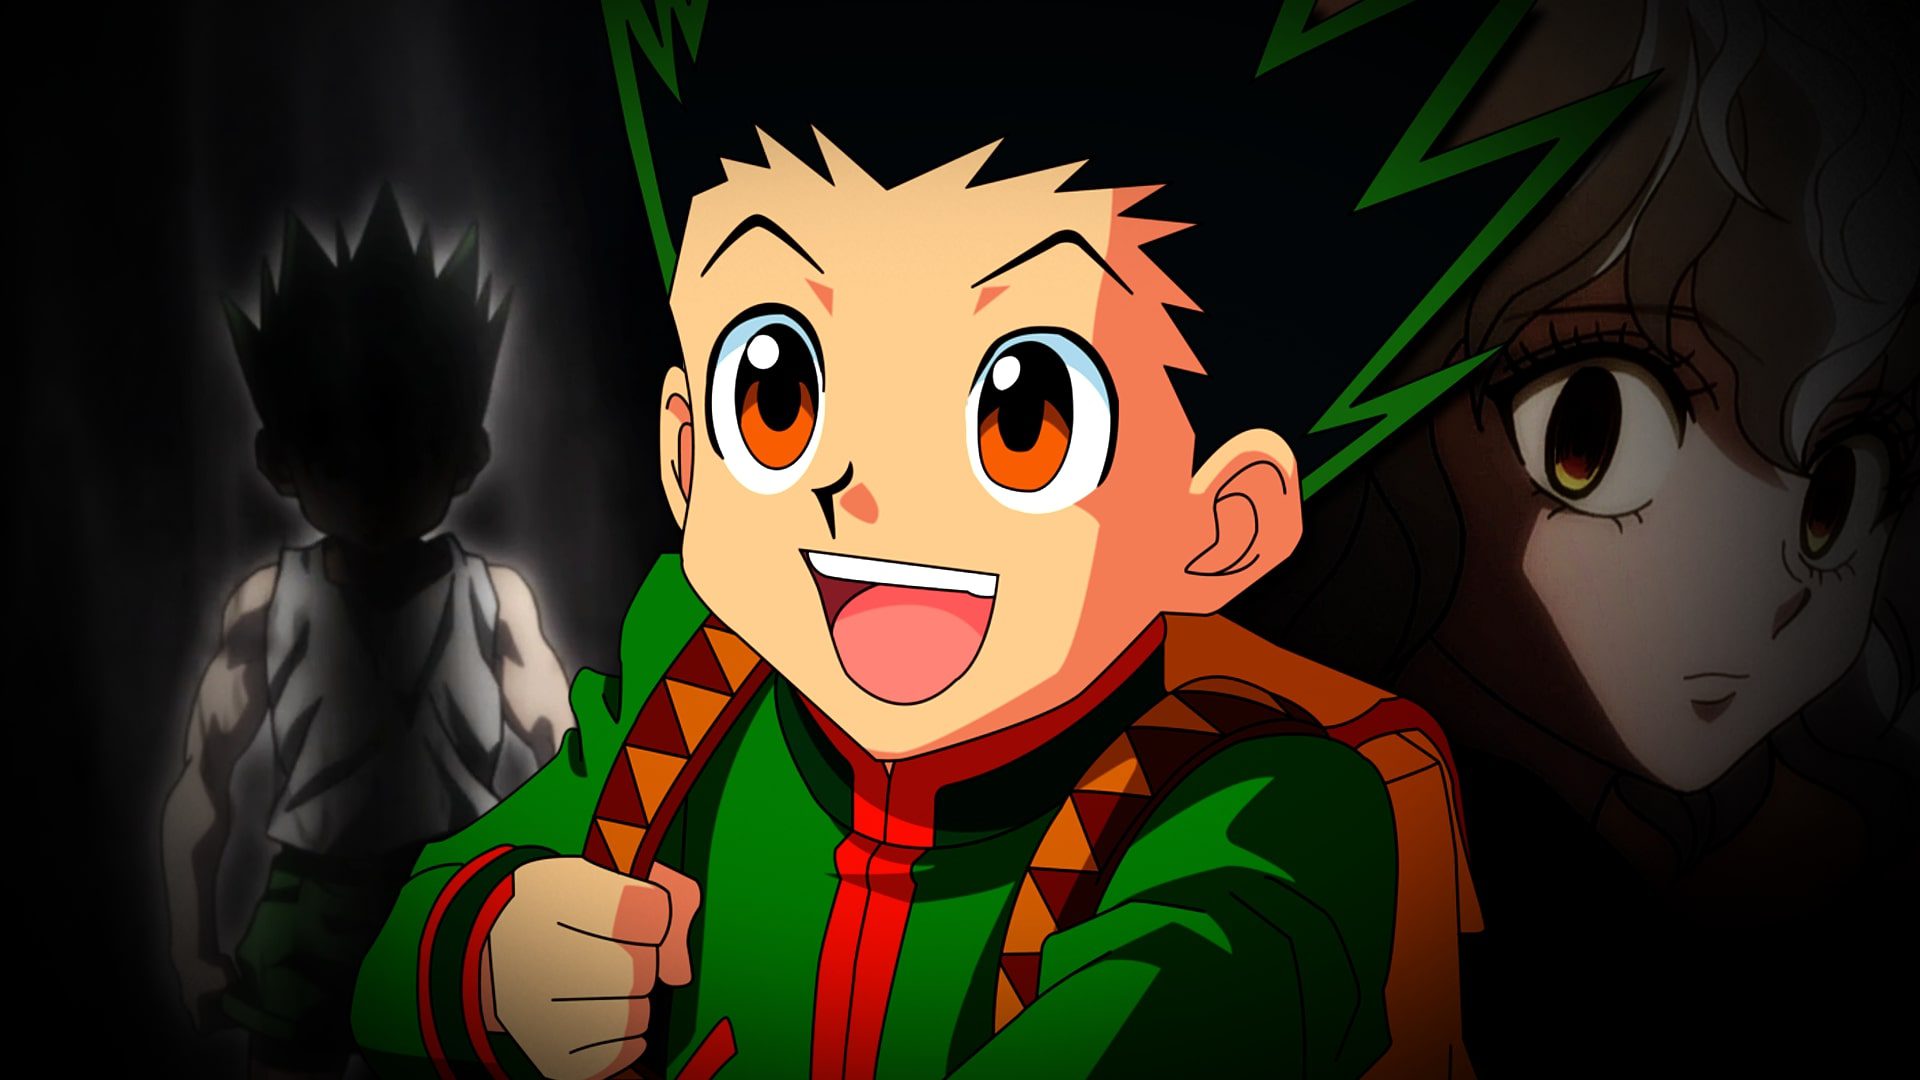 Gon Freecss Facts